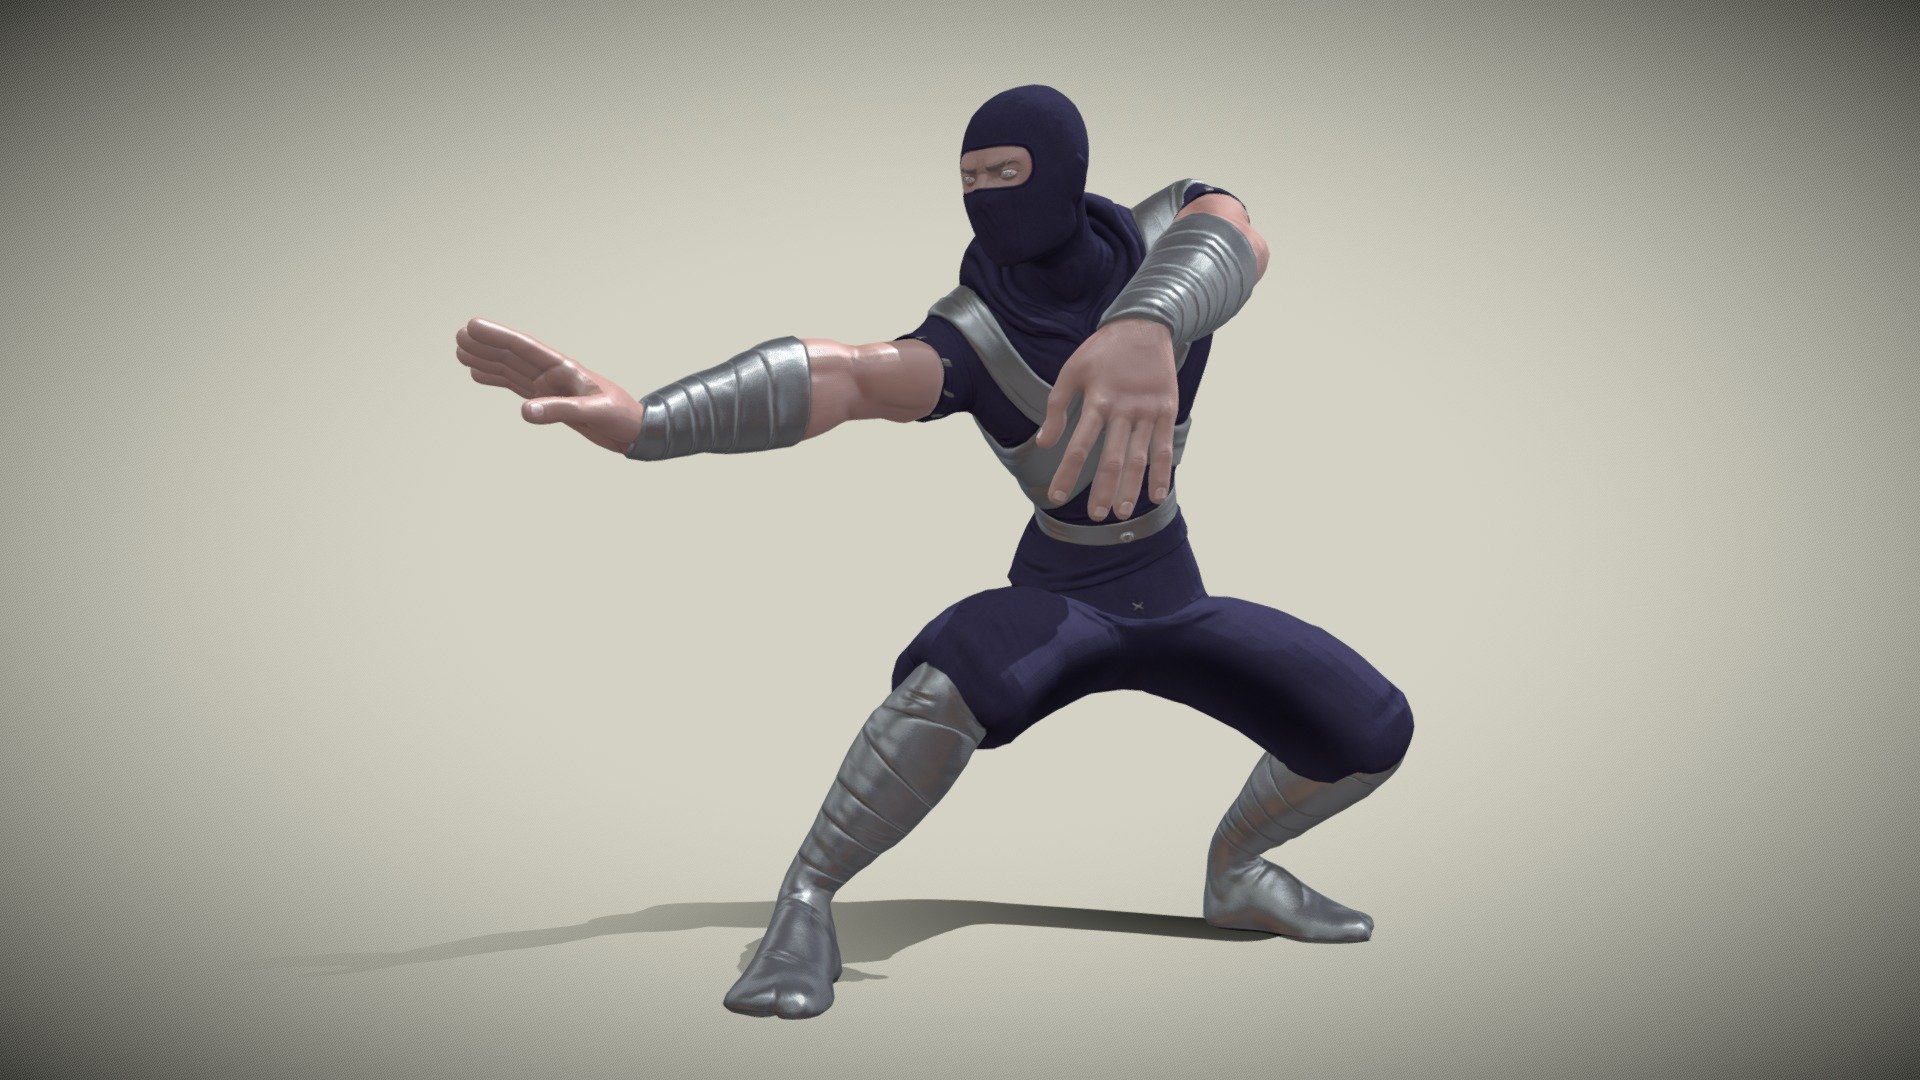 An Animated Ninja Model Gets Ready for Battle in this looping animation at 30 frames per second 3d model